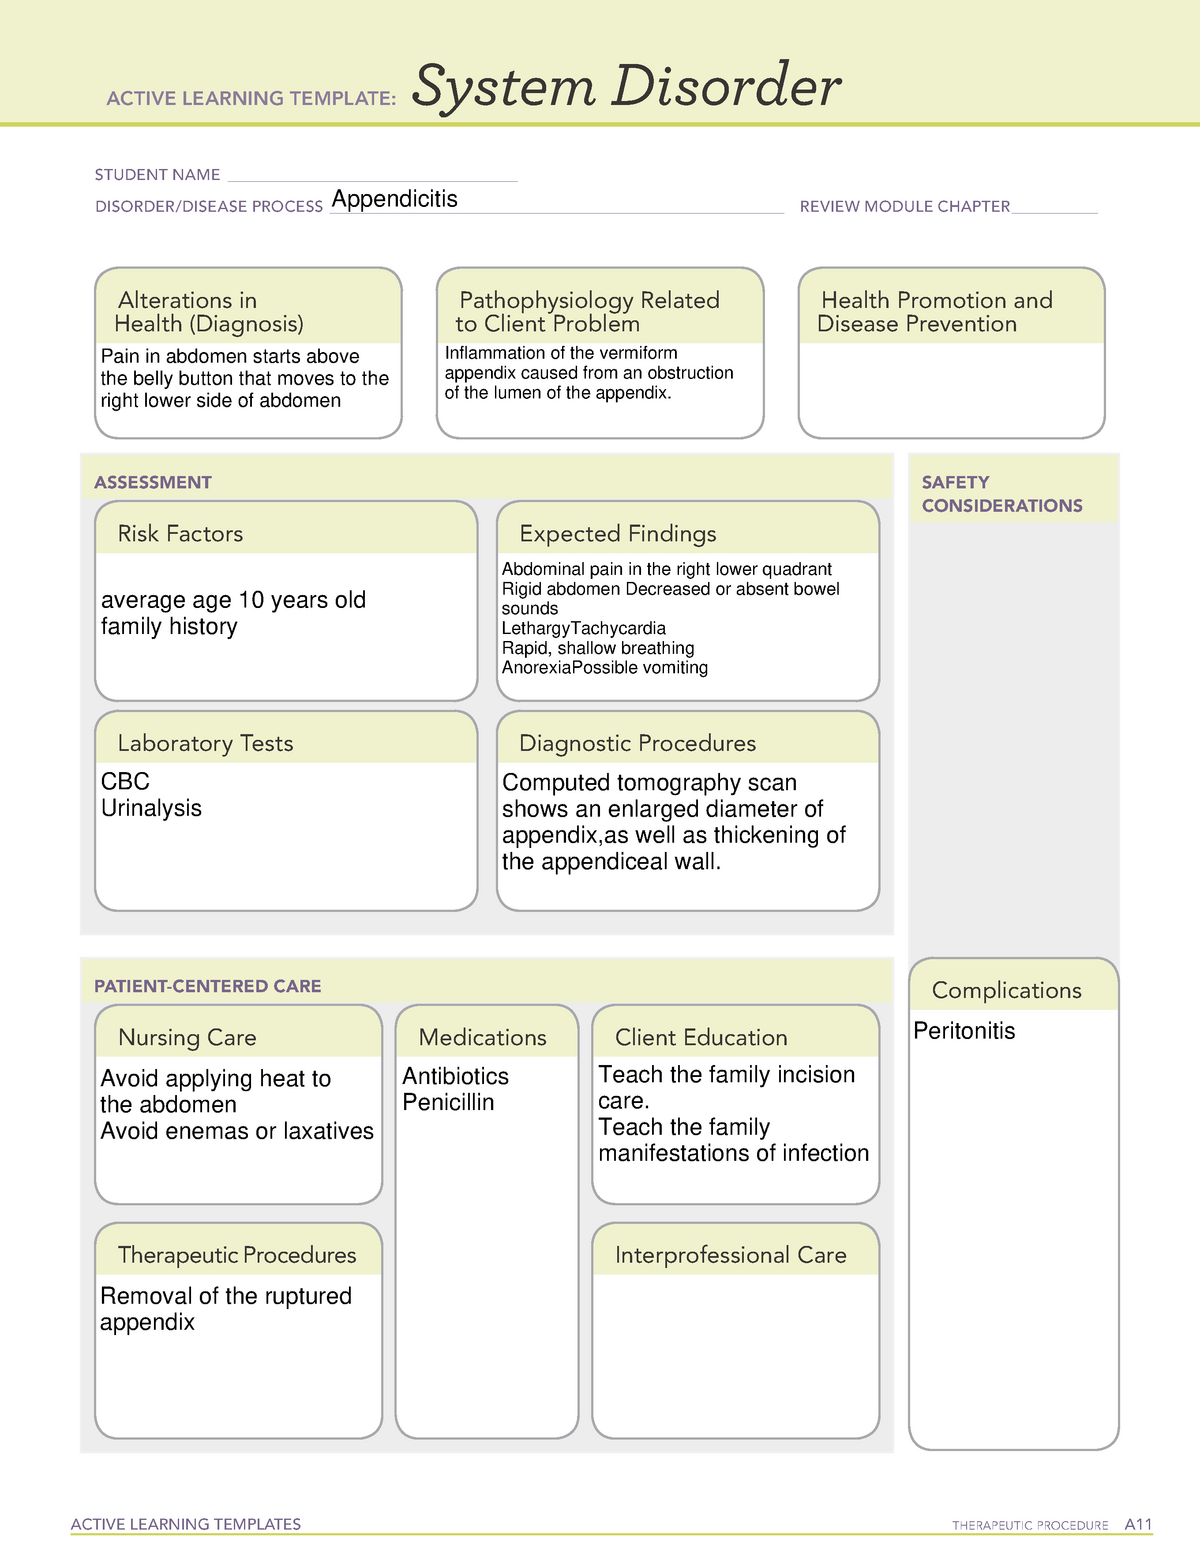 Remediation (Appendicitis) - ACTIVE LEARNING TEMPLATES THERAPEUTIC ...